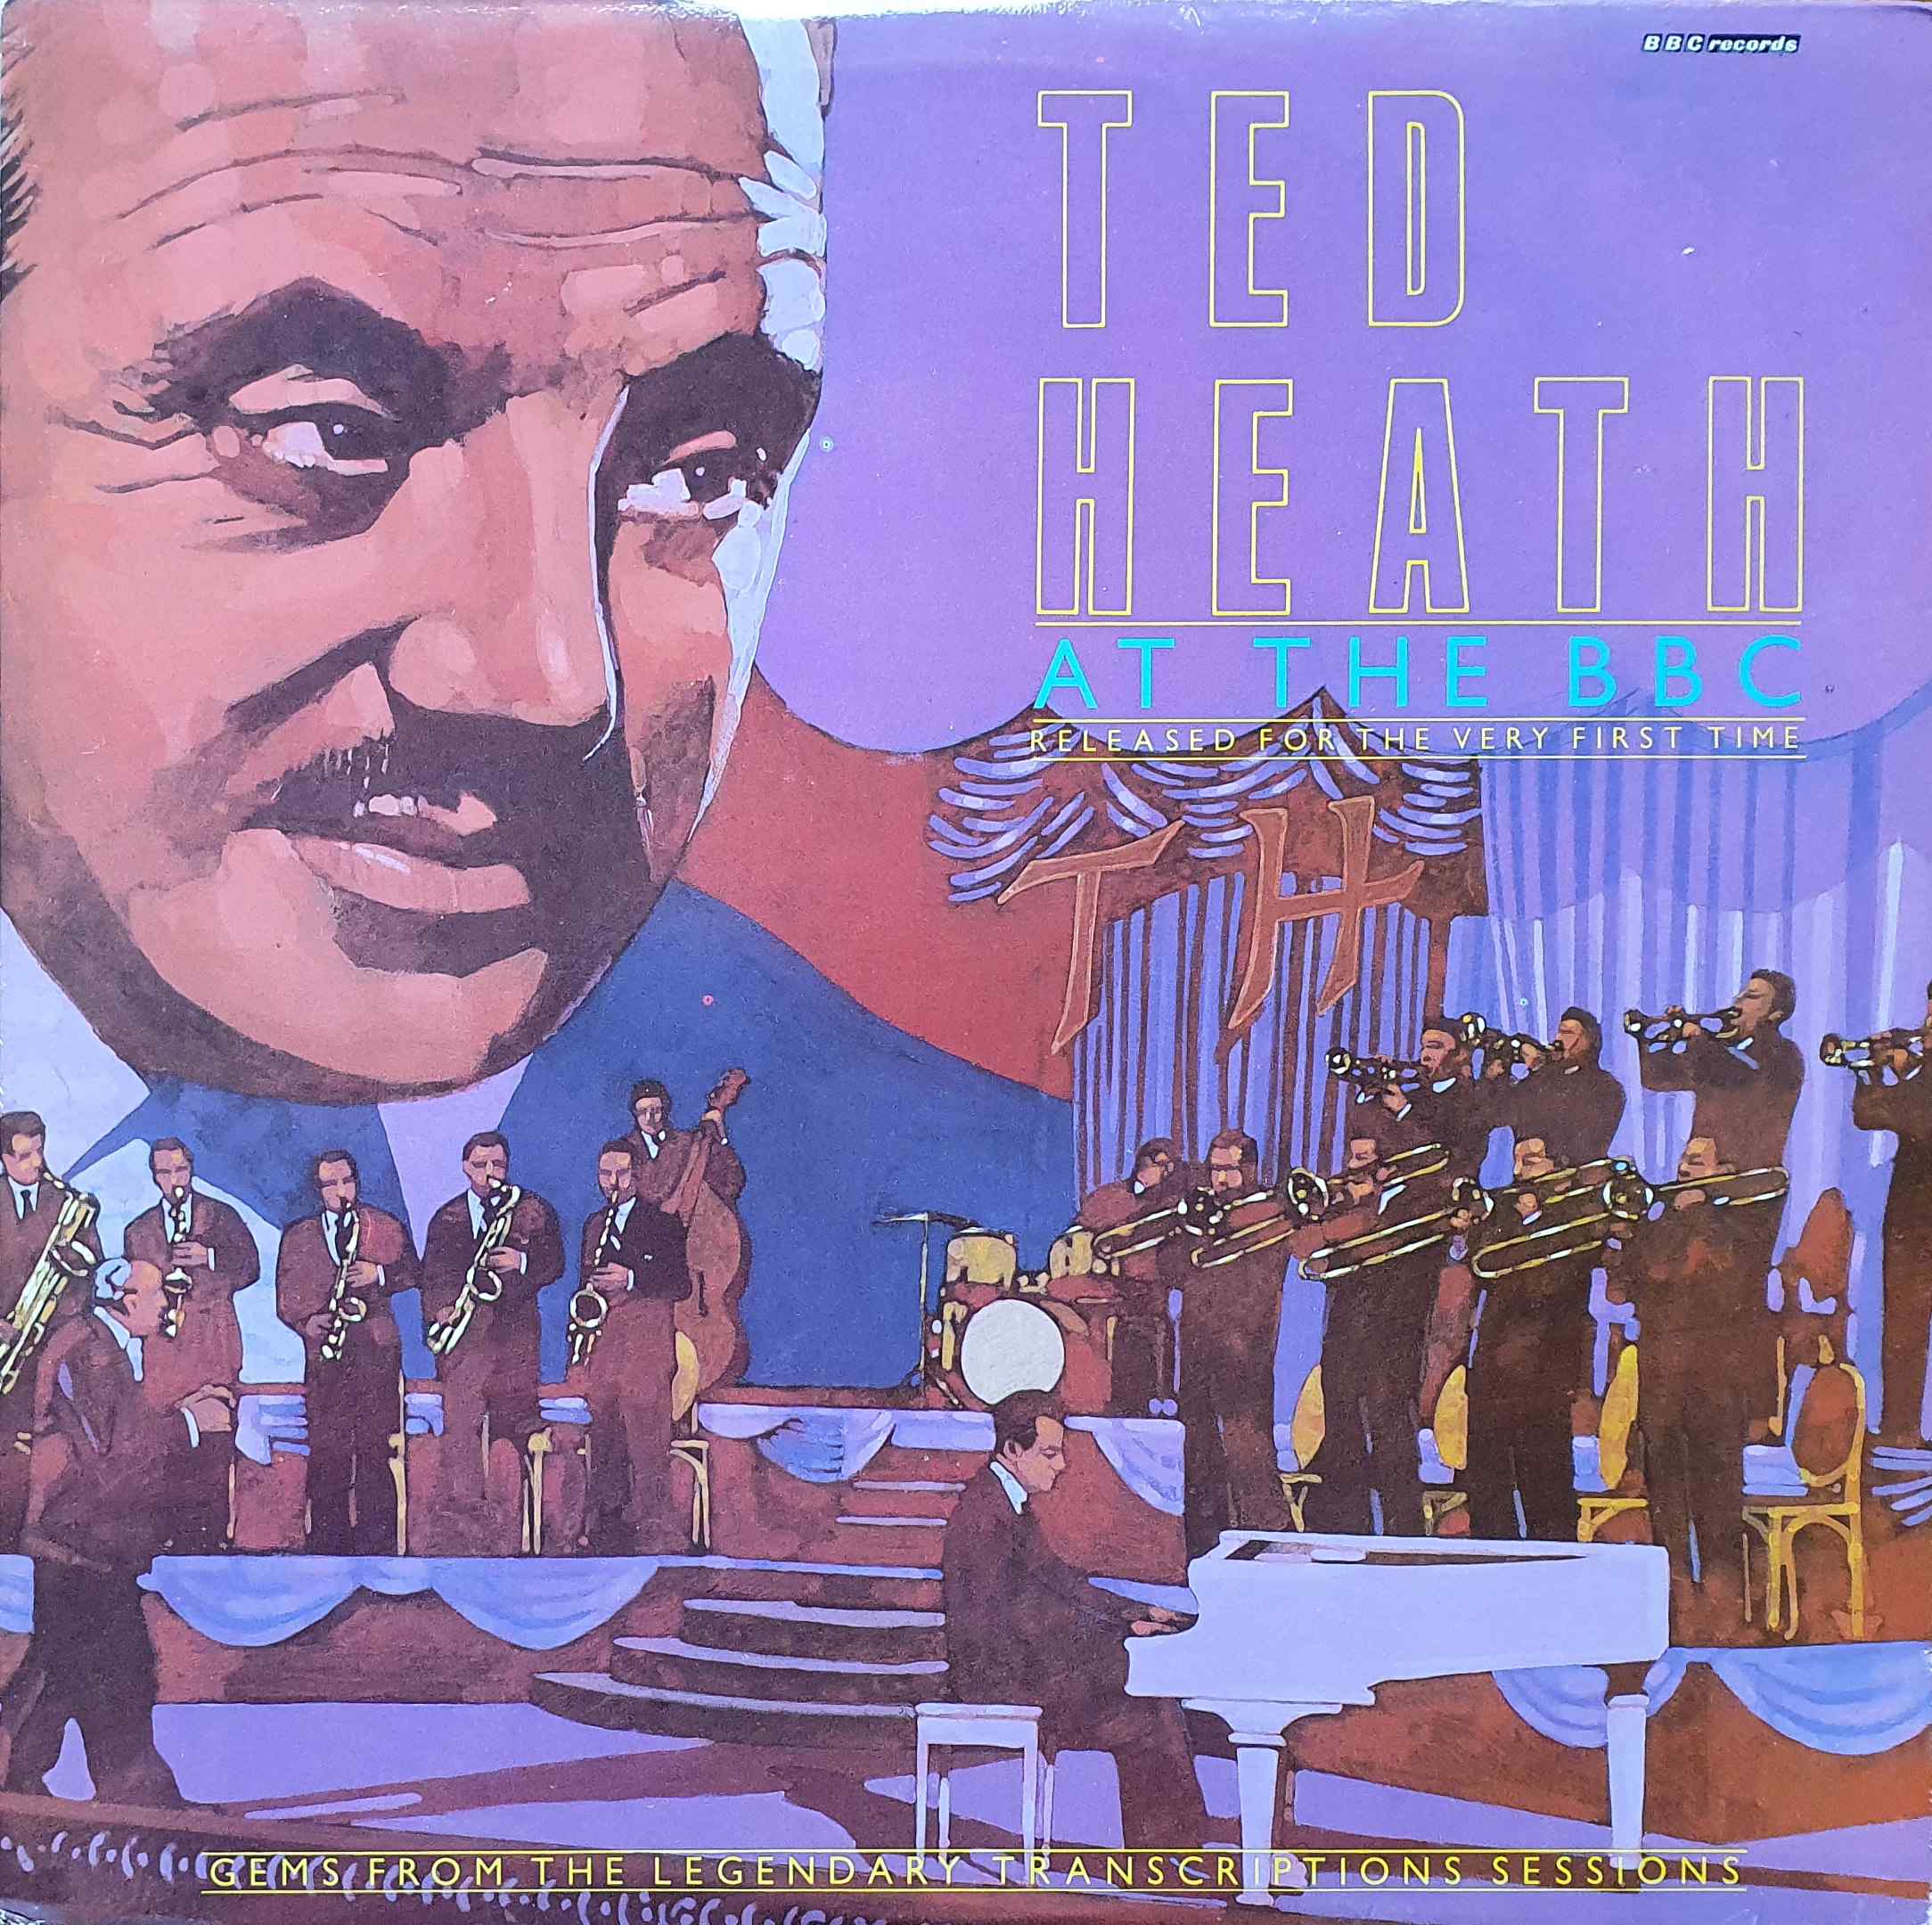 Picture of HRC - 1060 Ted Heath at the BBC (Canadian import) by artist Ted Heath from the BBC albums - Records and Tapes library